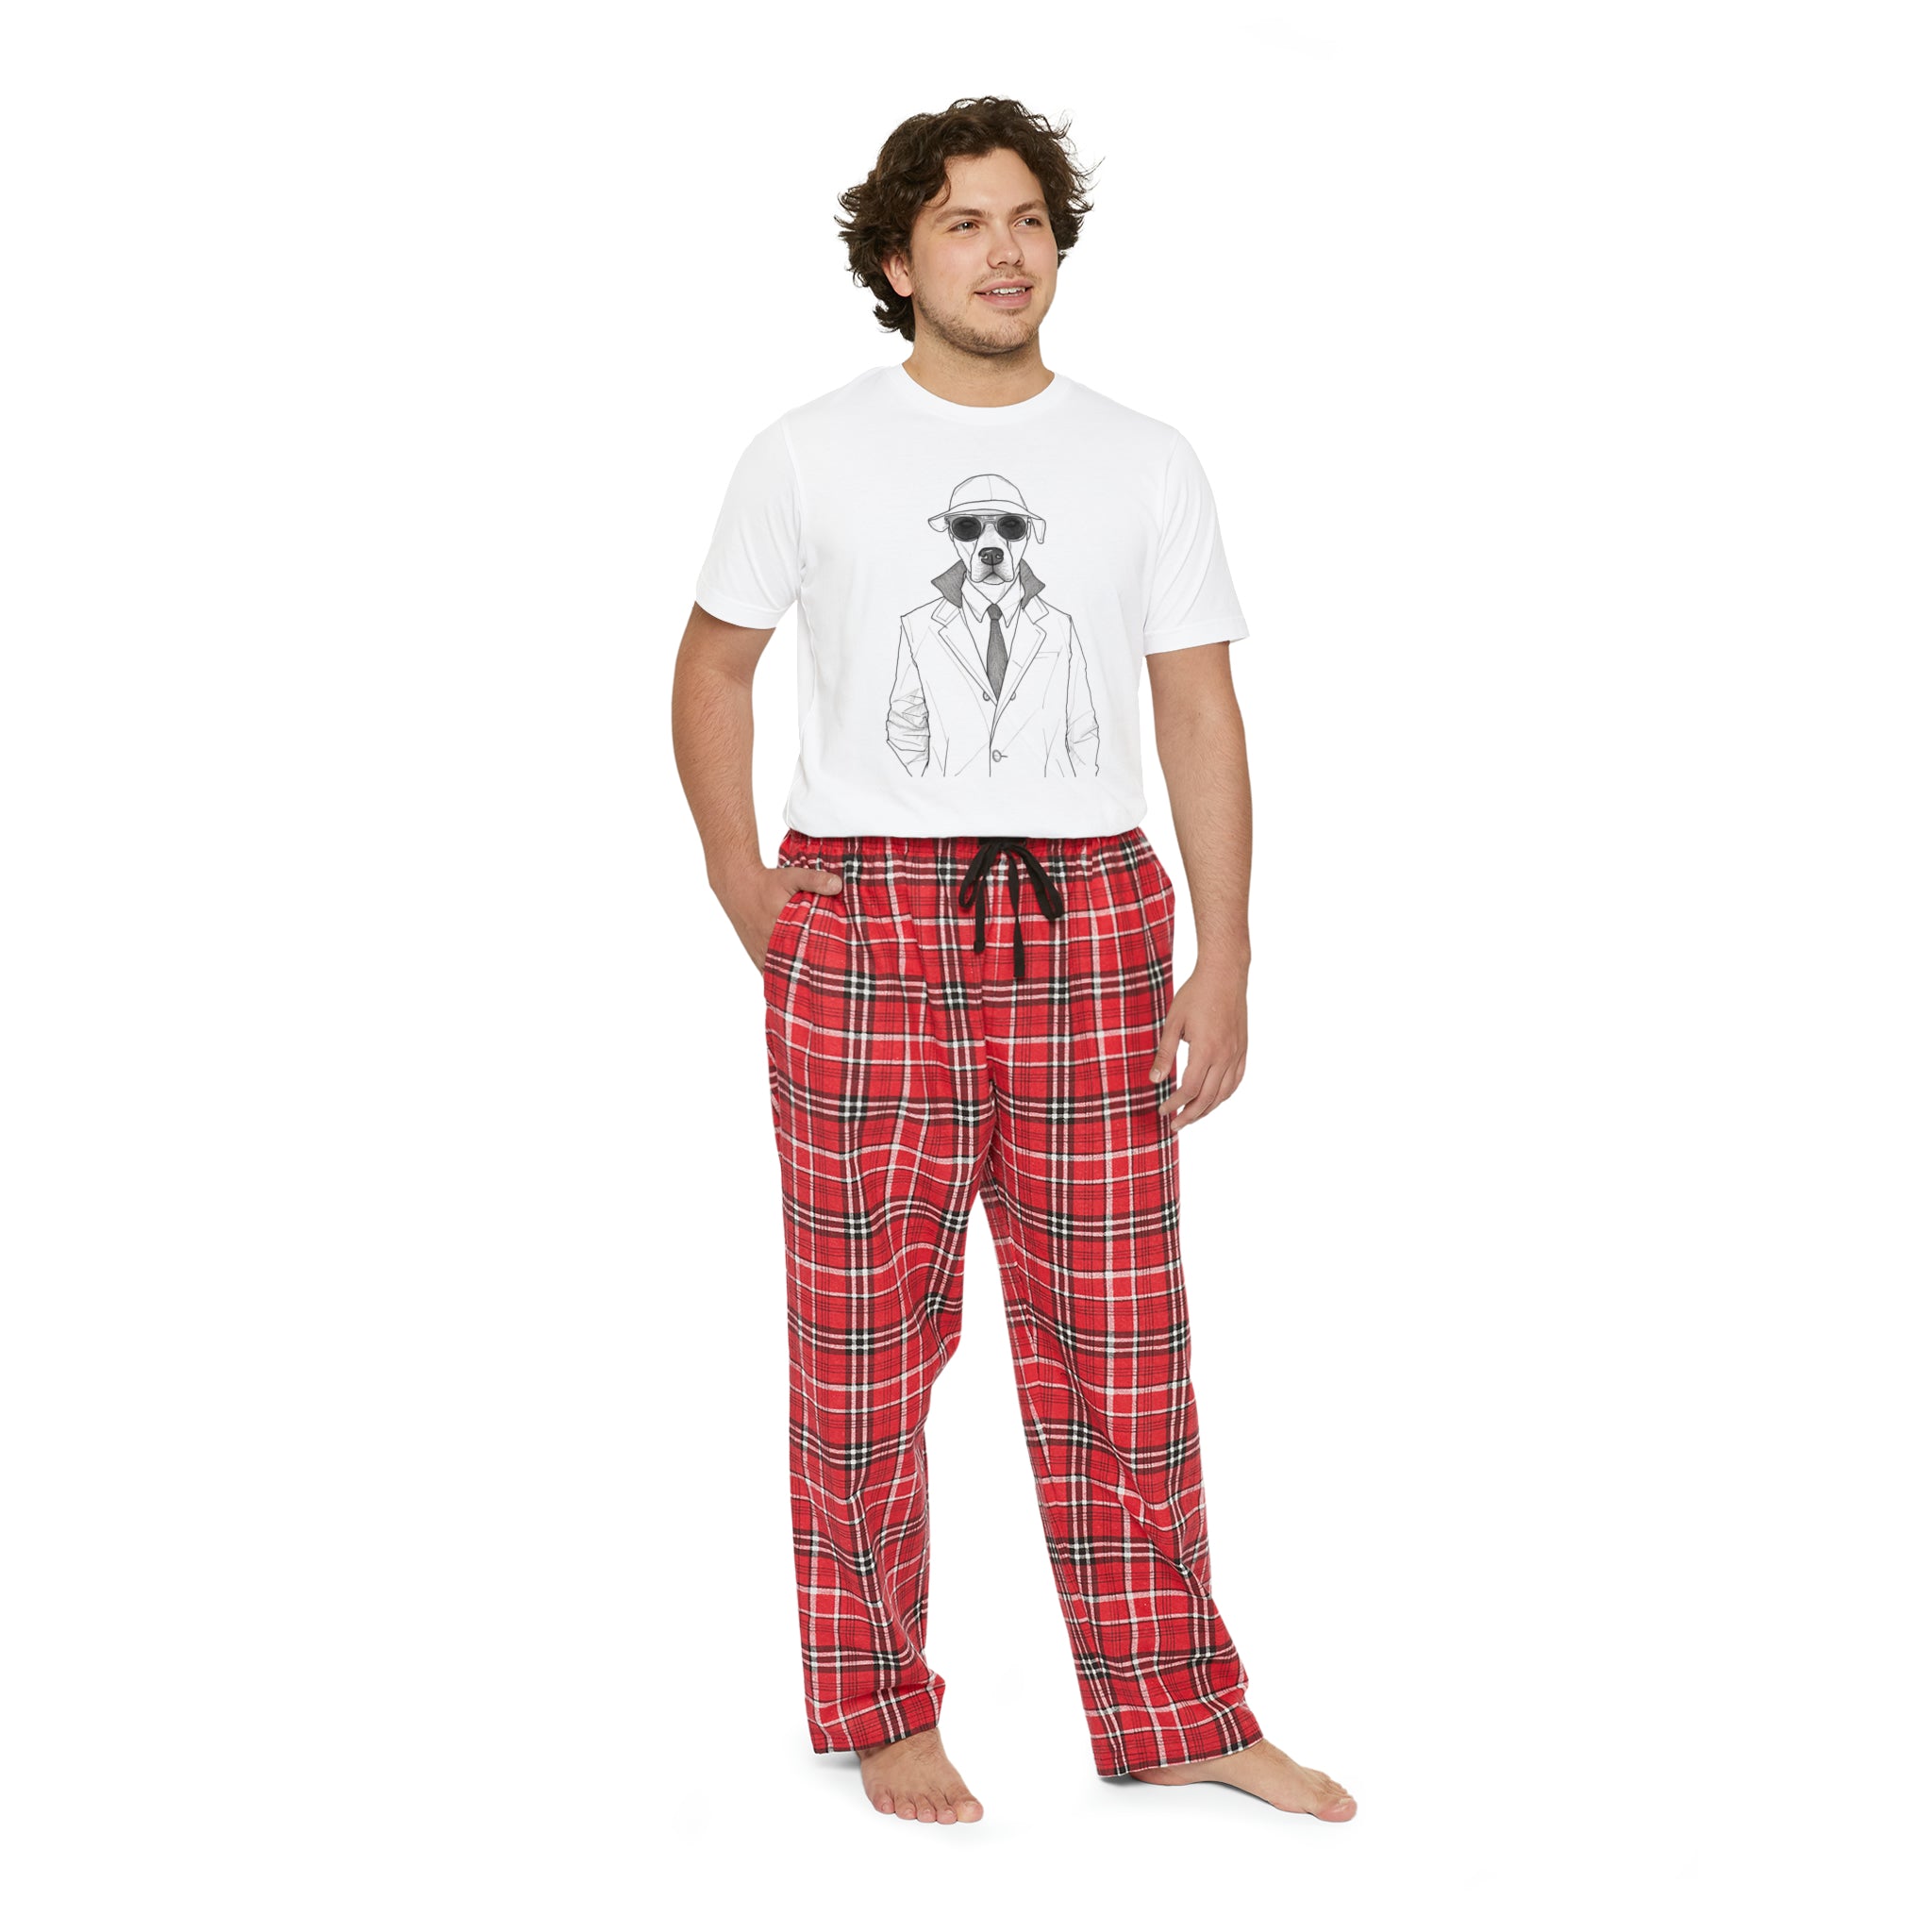 🐕 Artistic Slumber with Agent Dog: Dive into comfort with the "Agent Dog Single Line Pencil Sketch Men's Short Sleeve Pajama Set." This unique sleepwear features an elegant single line pencil sketch of a canine agent, perfect for men who appreciate art and a touch of whimsy in their nightwear.